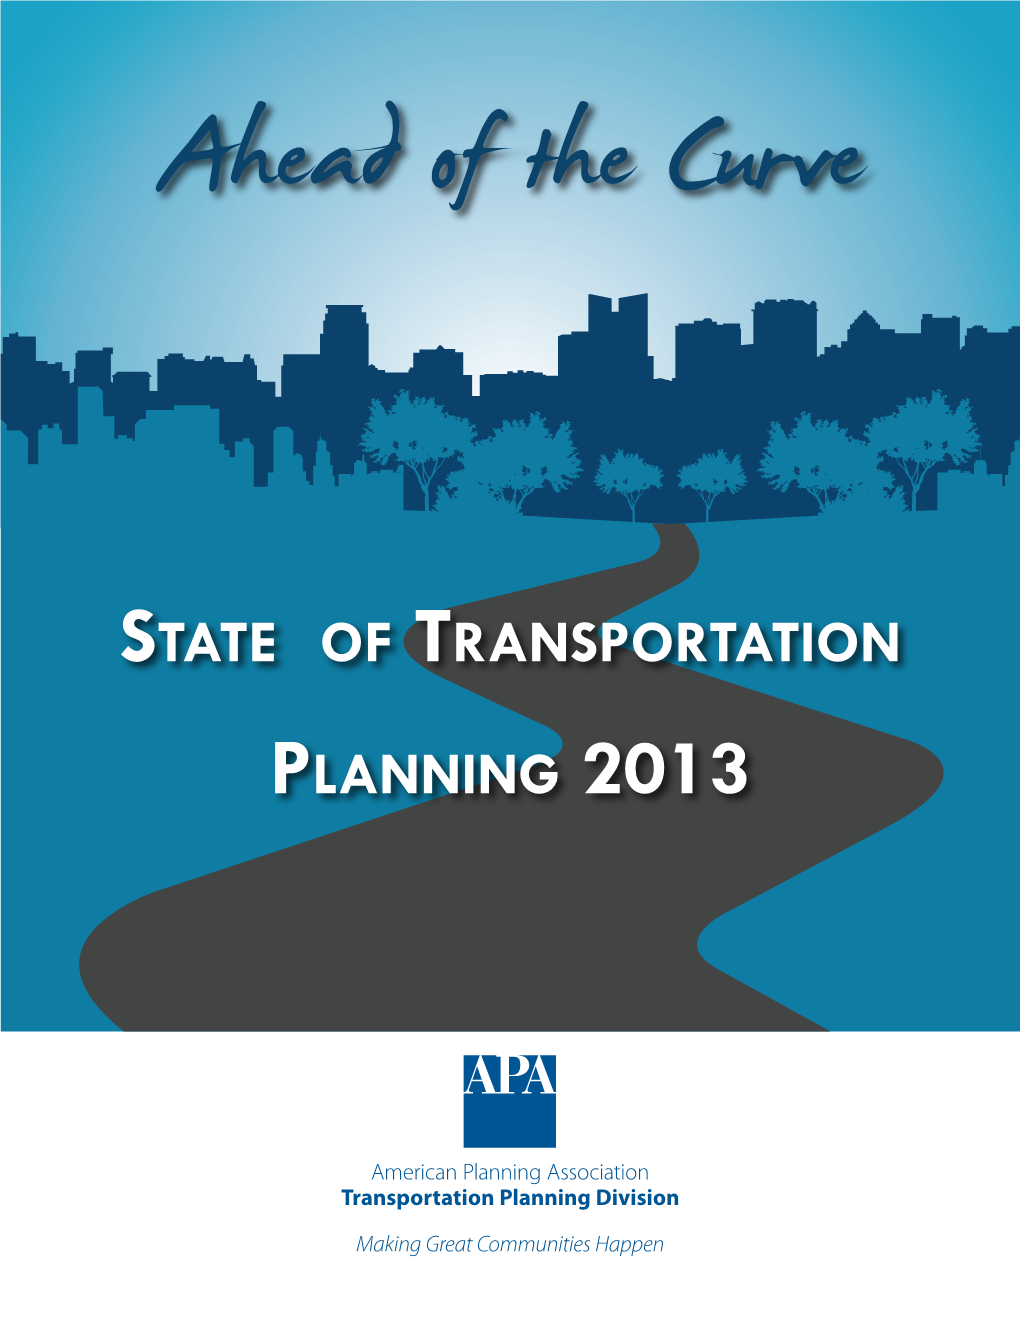 State of Transportation Planning 2013 Resiliency and Recovery